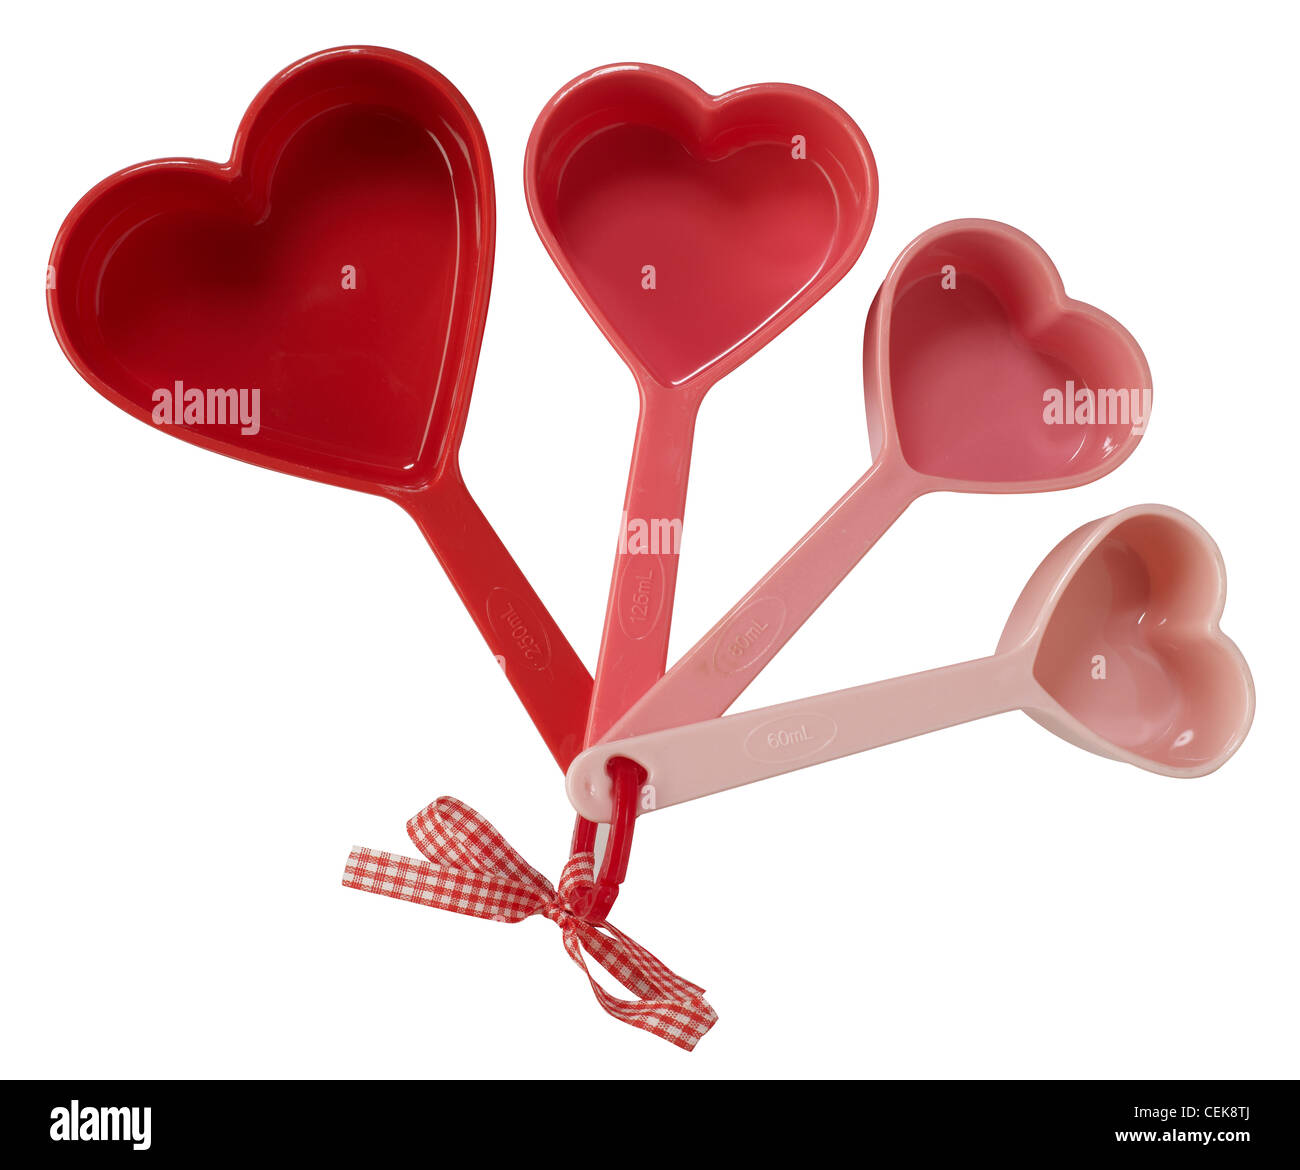 HEART SHAPED MEASURING SPOONS Stock Photo - Alamy